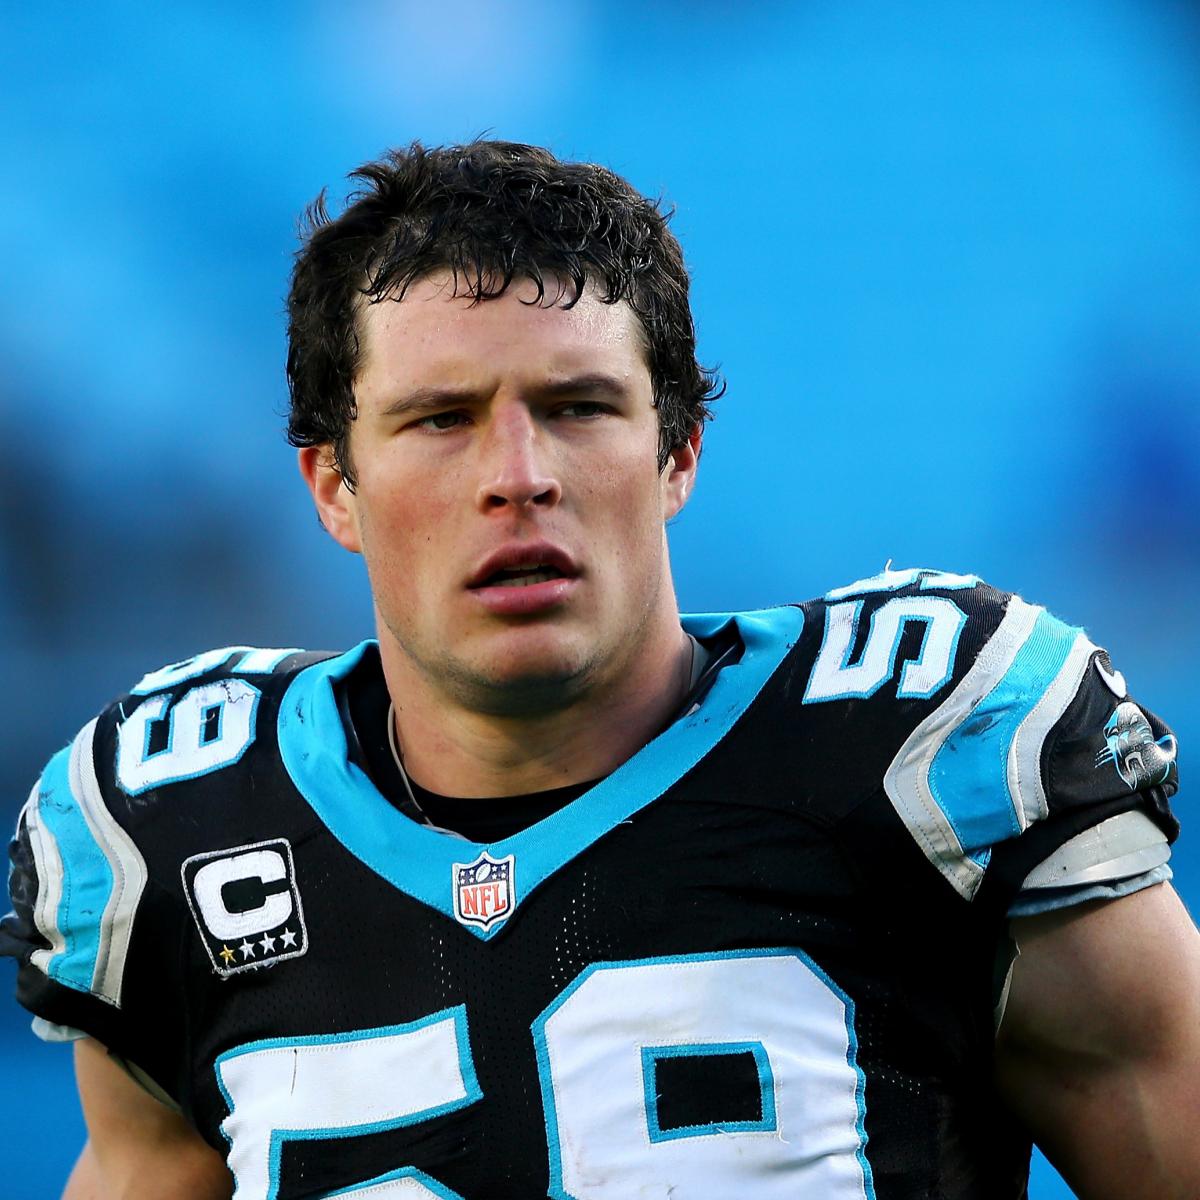 Luke Kuechly Injury: Updates on Panthers Star's Concussion and Return ...